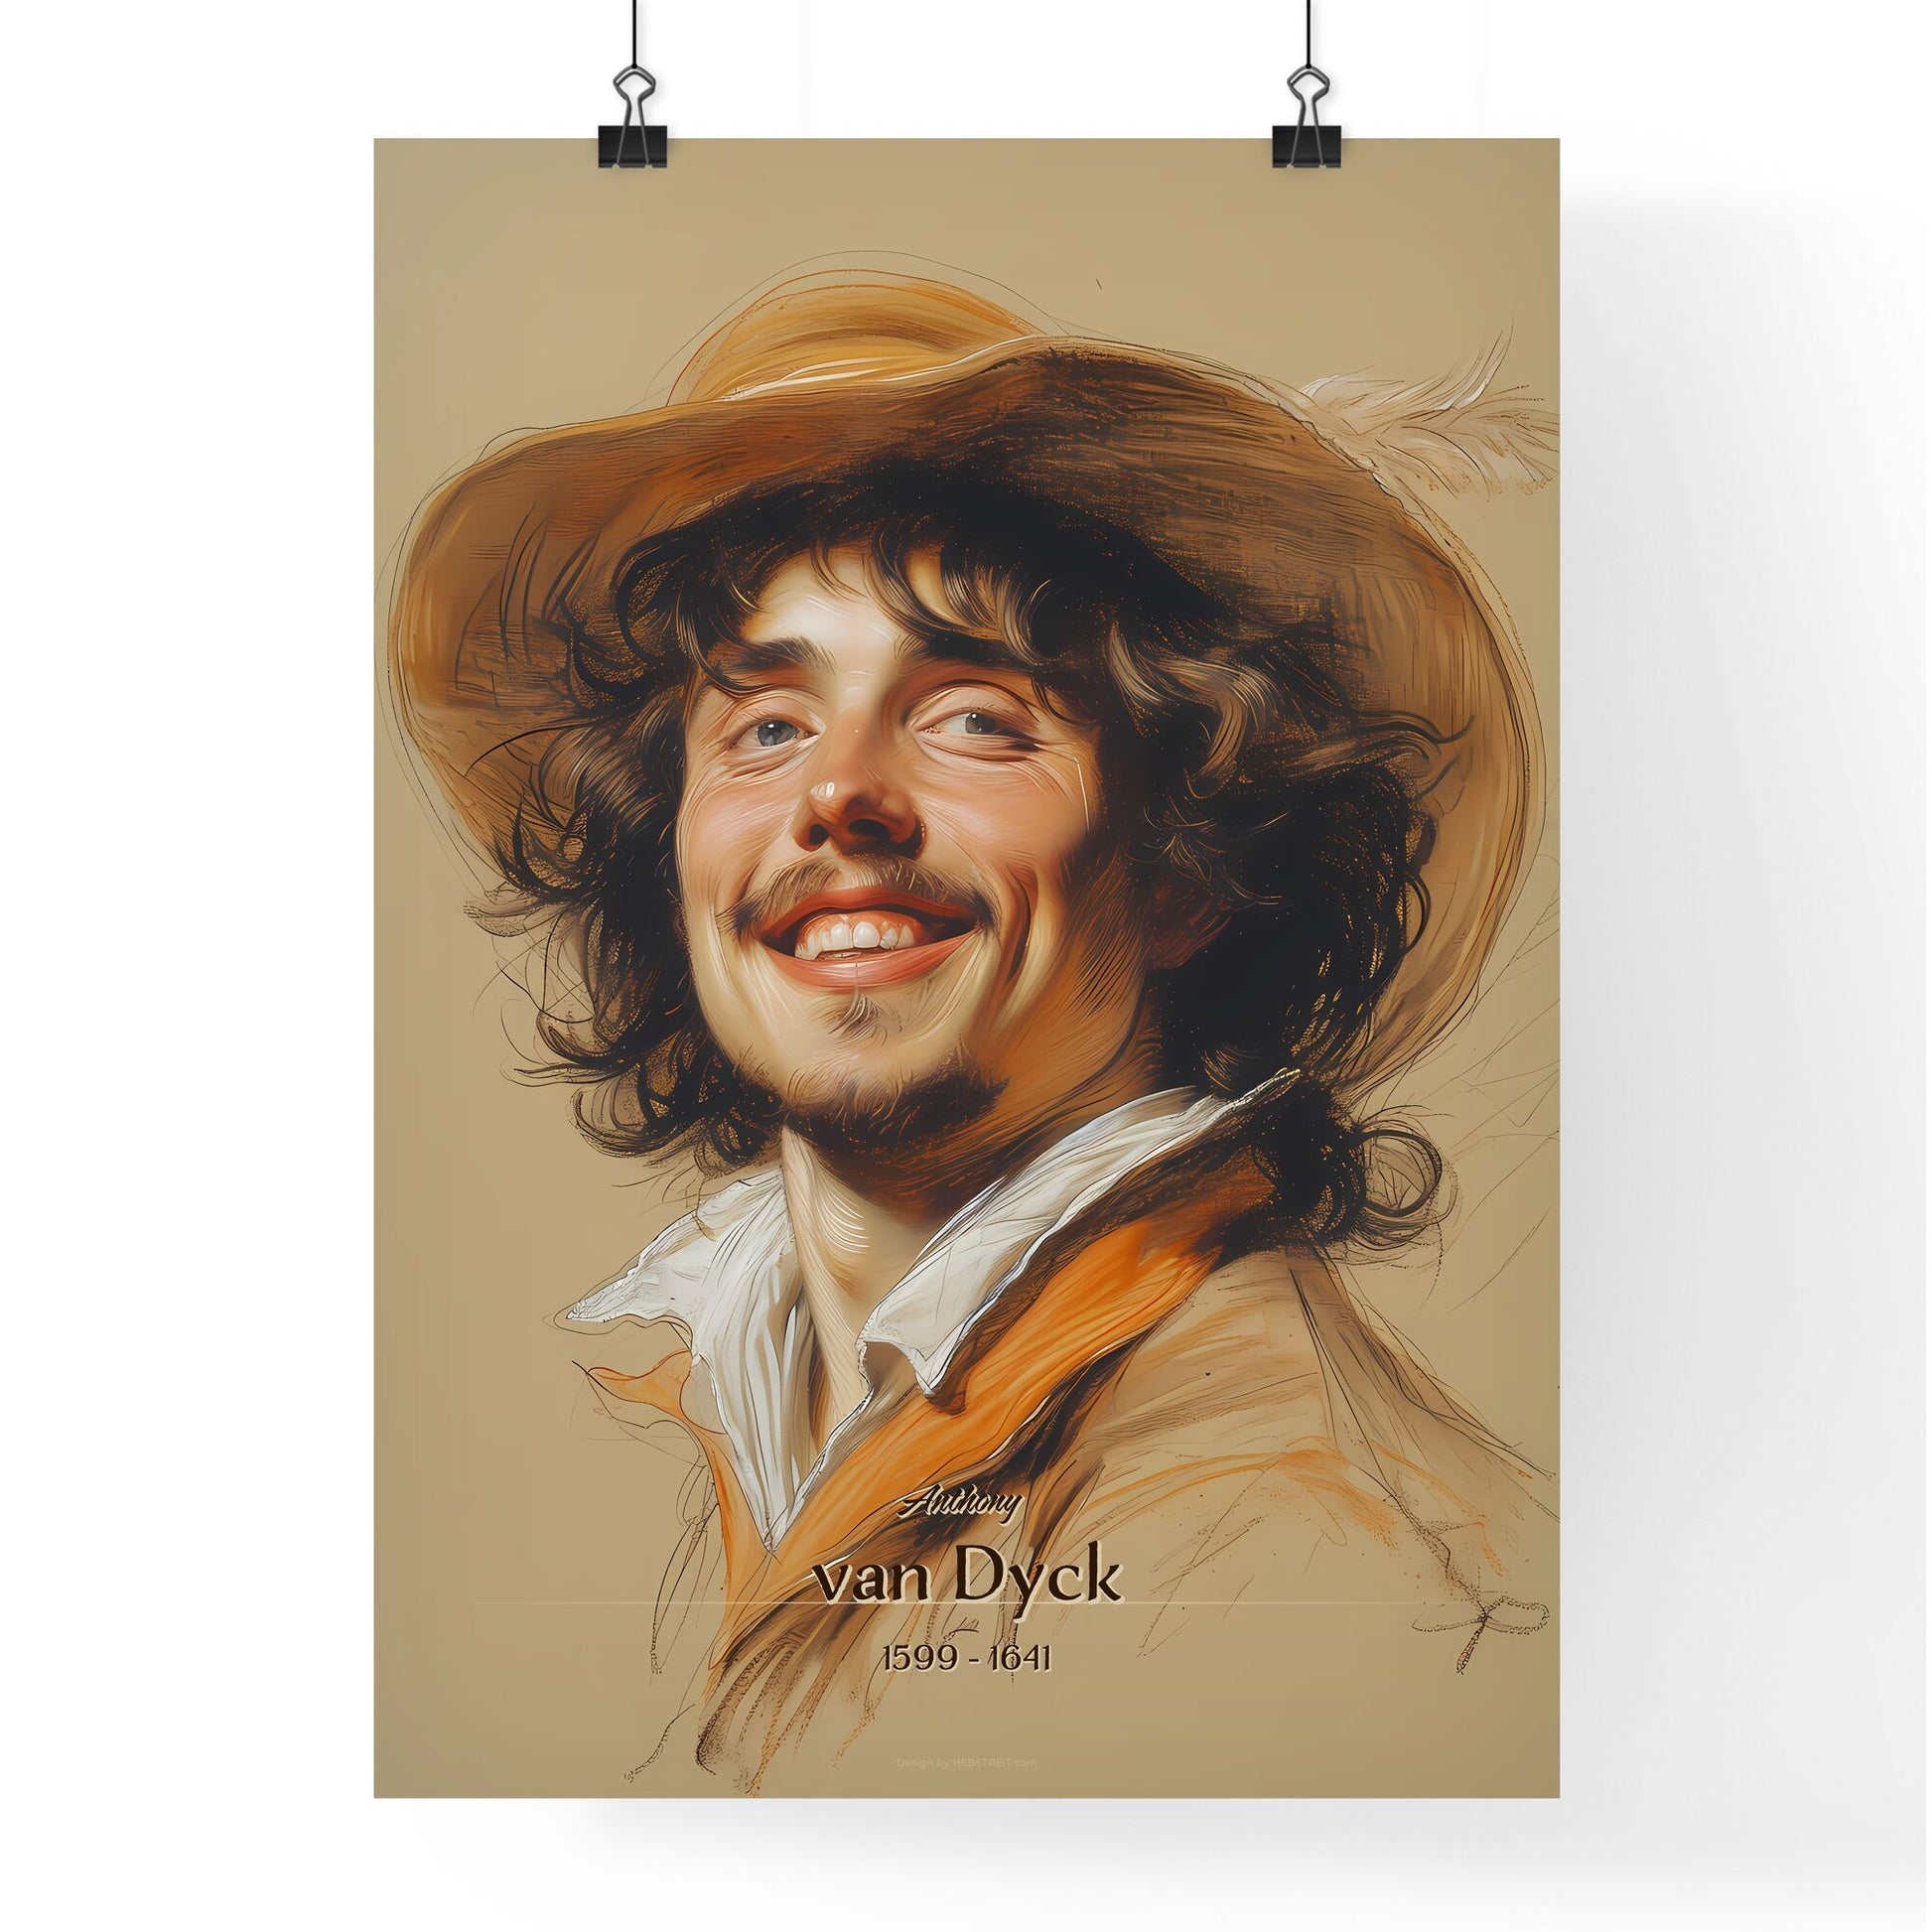 Anthony, van Dyck, 1599 - 1641, A Poster of a man wearing a hat Default Title